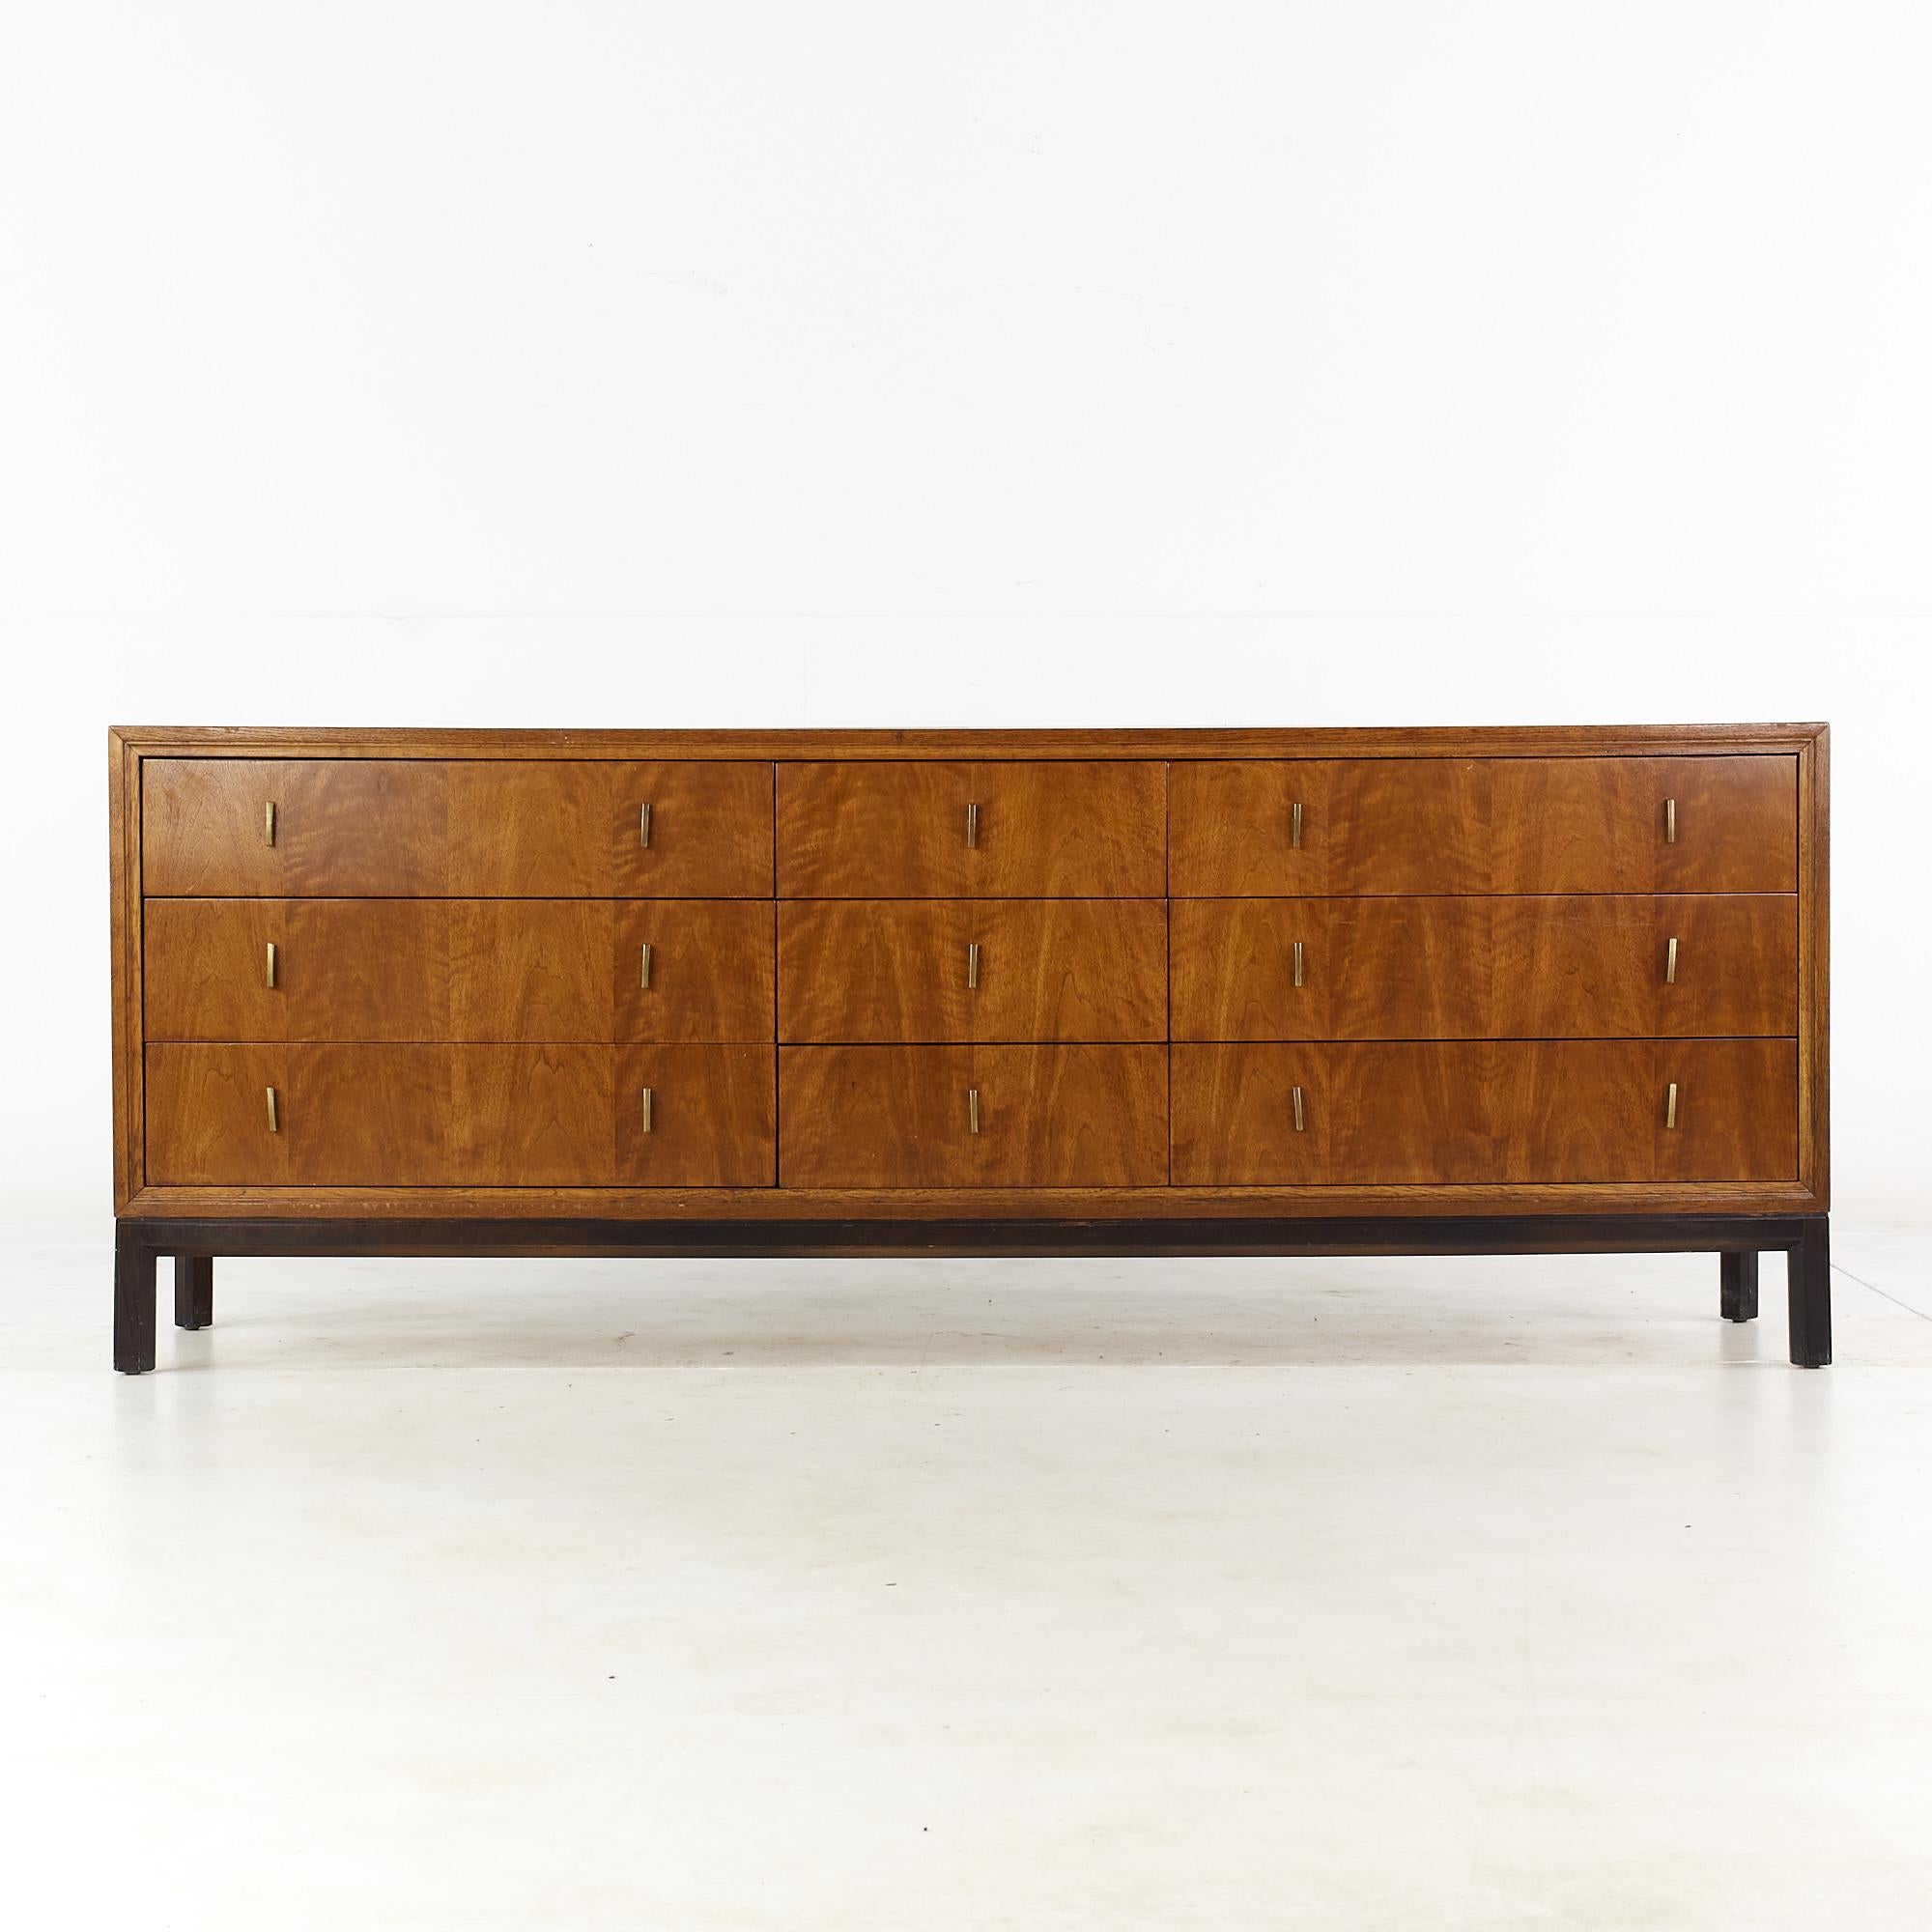 Henredon mid century walnut and brass 9 drawer lowboy dresser

This dresser measures: 80 wide x 19 deep x 30.25 inches high

All pieces of furniture can be had in what we call restored vintage condition. That means the piece is restored upon